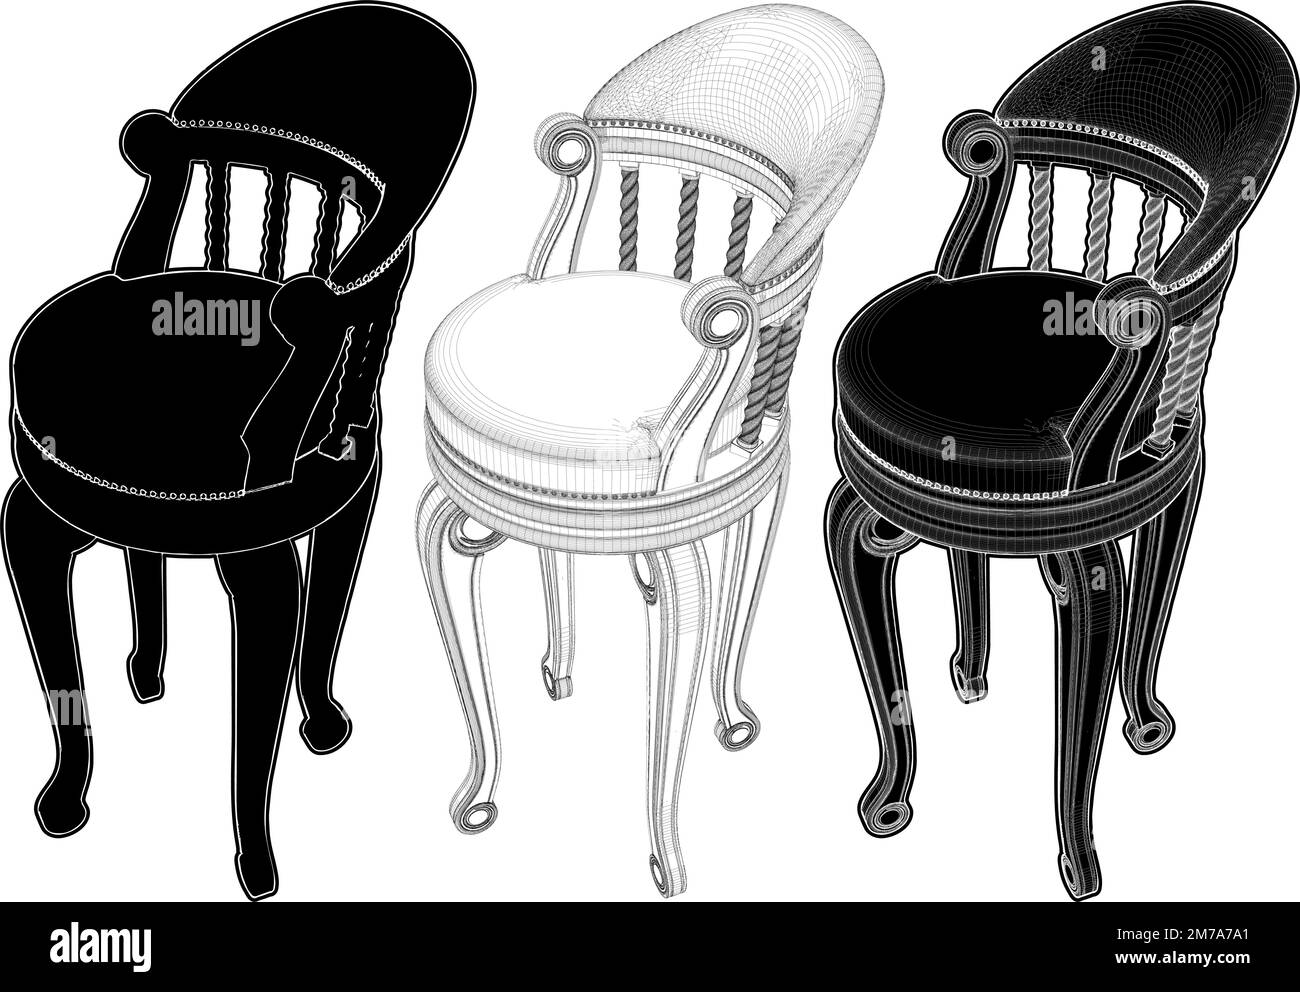 Bar Easy Chair Vector. Illustration Isolated On White Background. A Vector Illustration Of Bar Chair Background. Stock Vector